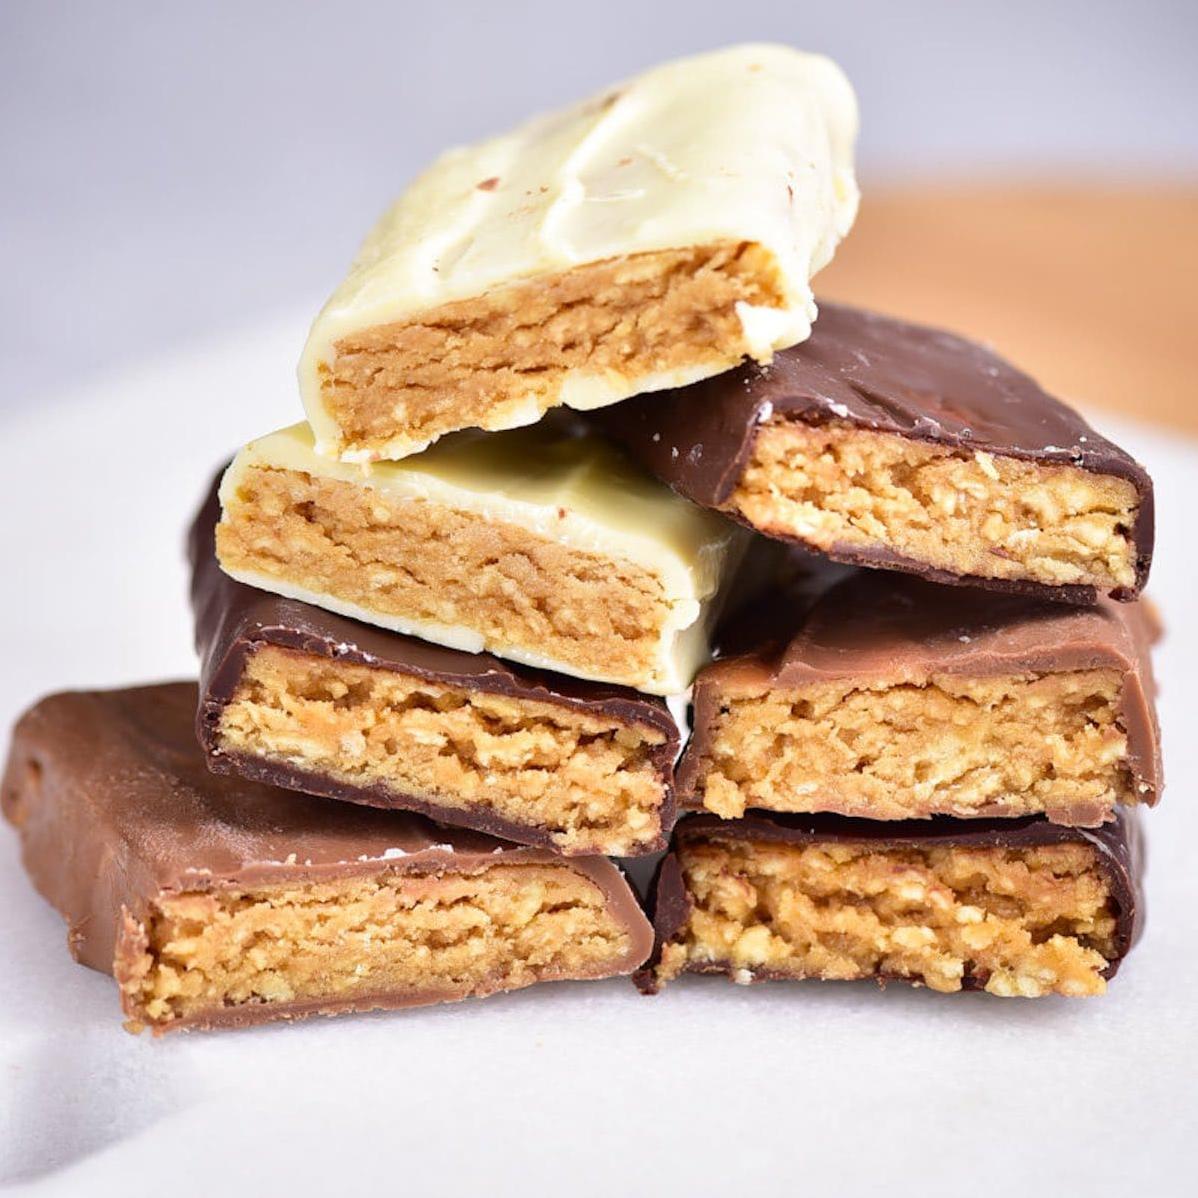  No need to settle for store-bought protein bars when you can make these at home.